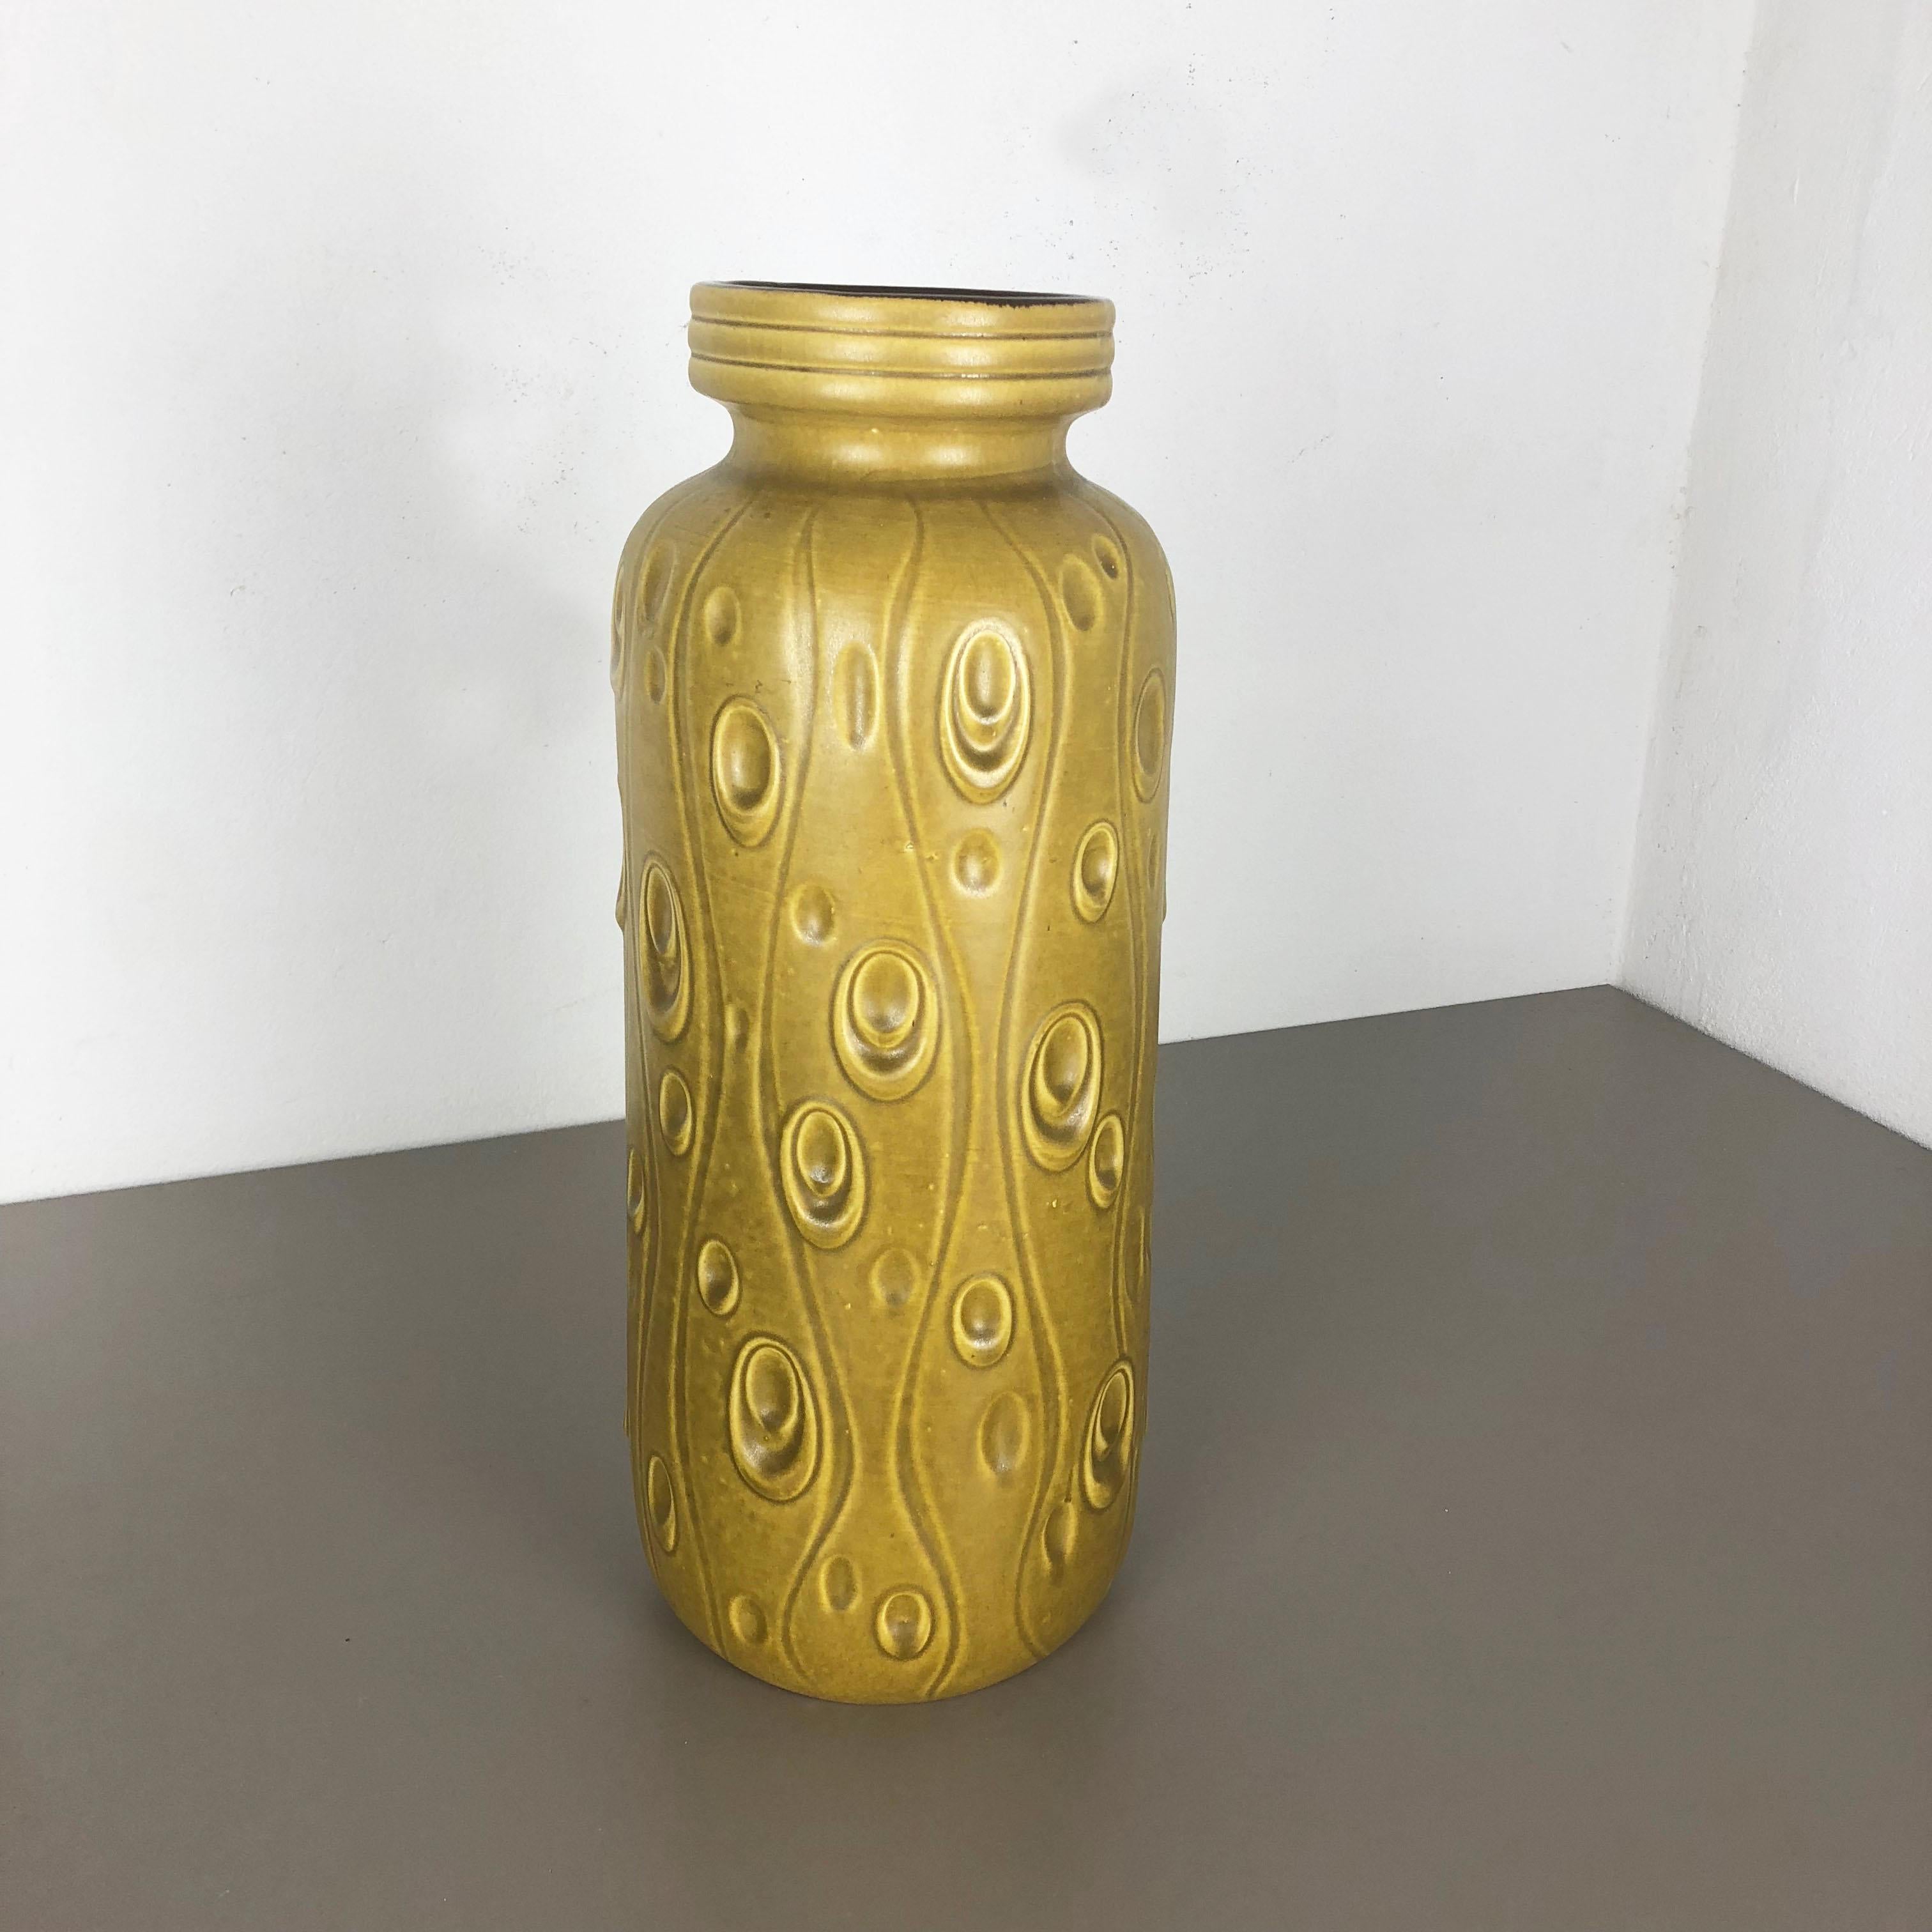 Article:

Fat lava art vase extra large version


Model: 288-51


Producer:

Scheurich, Germany



Decade:

1970s




This original vintage vase was produced in the 1970s in Germany. It is made of ceramic pottery with abstract